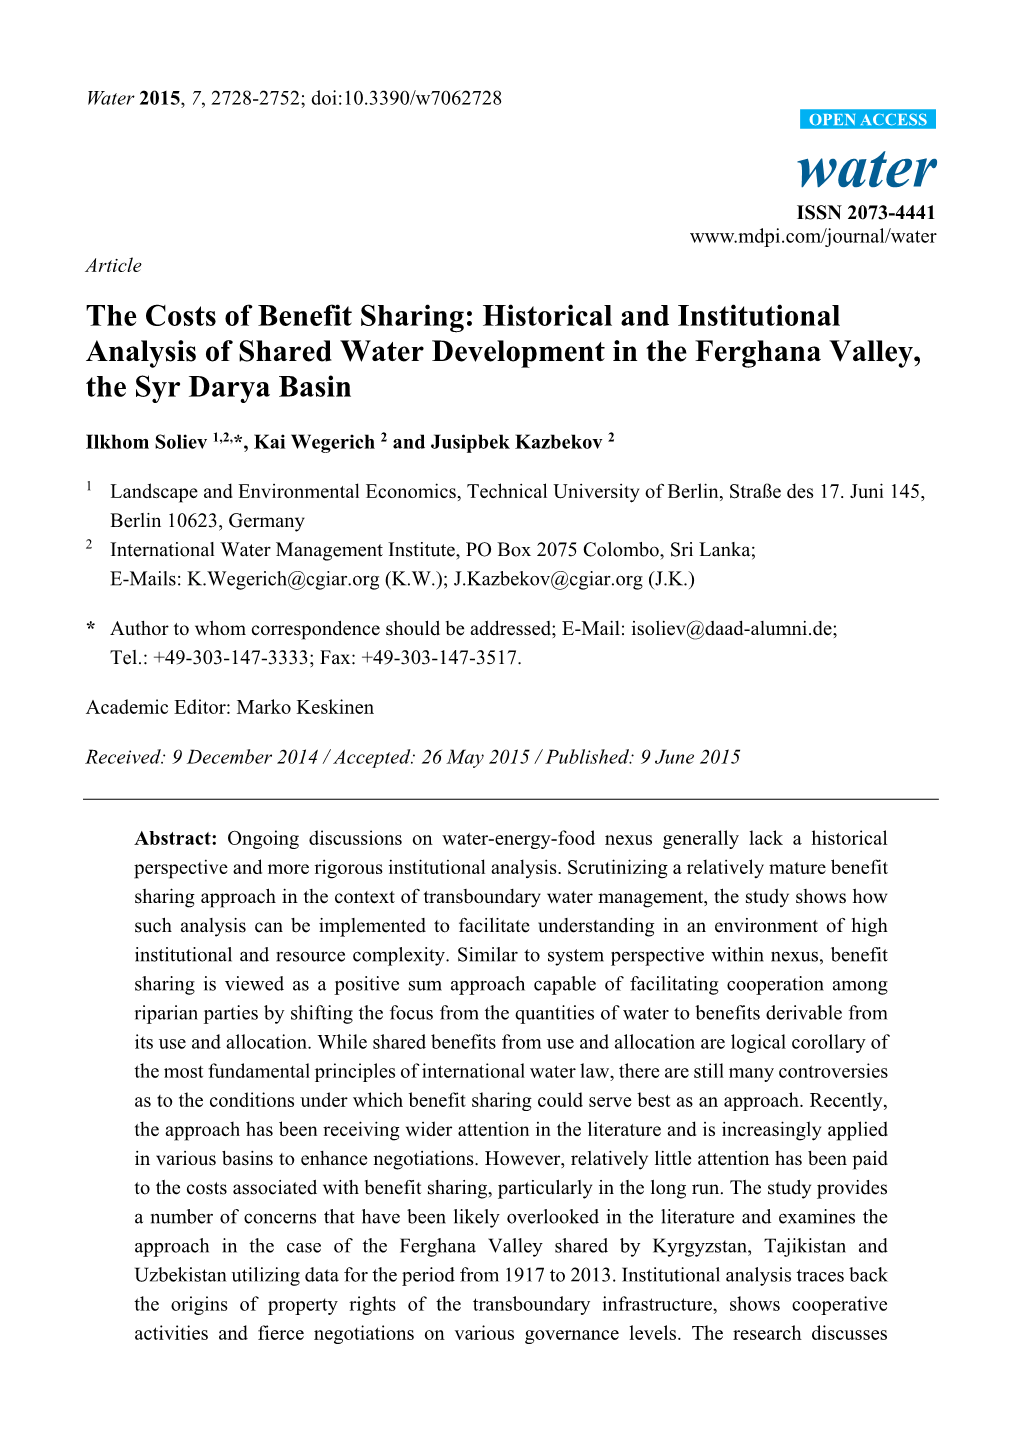 The Costs of Benefit Sharing: Historical and Institutional Analysis of Shared Water Development in the Ferghana Valley, the Syr Darya Basin